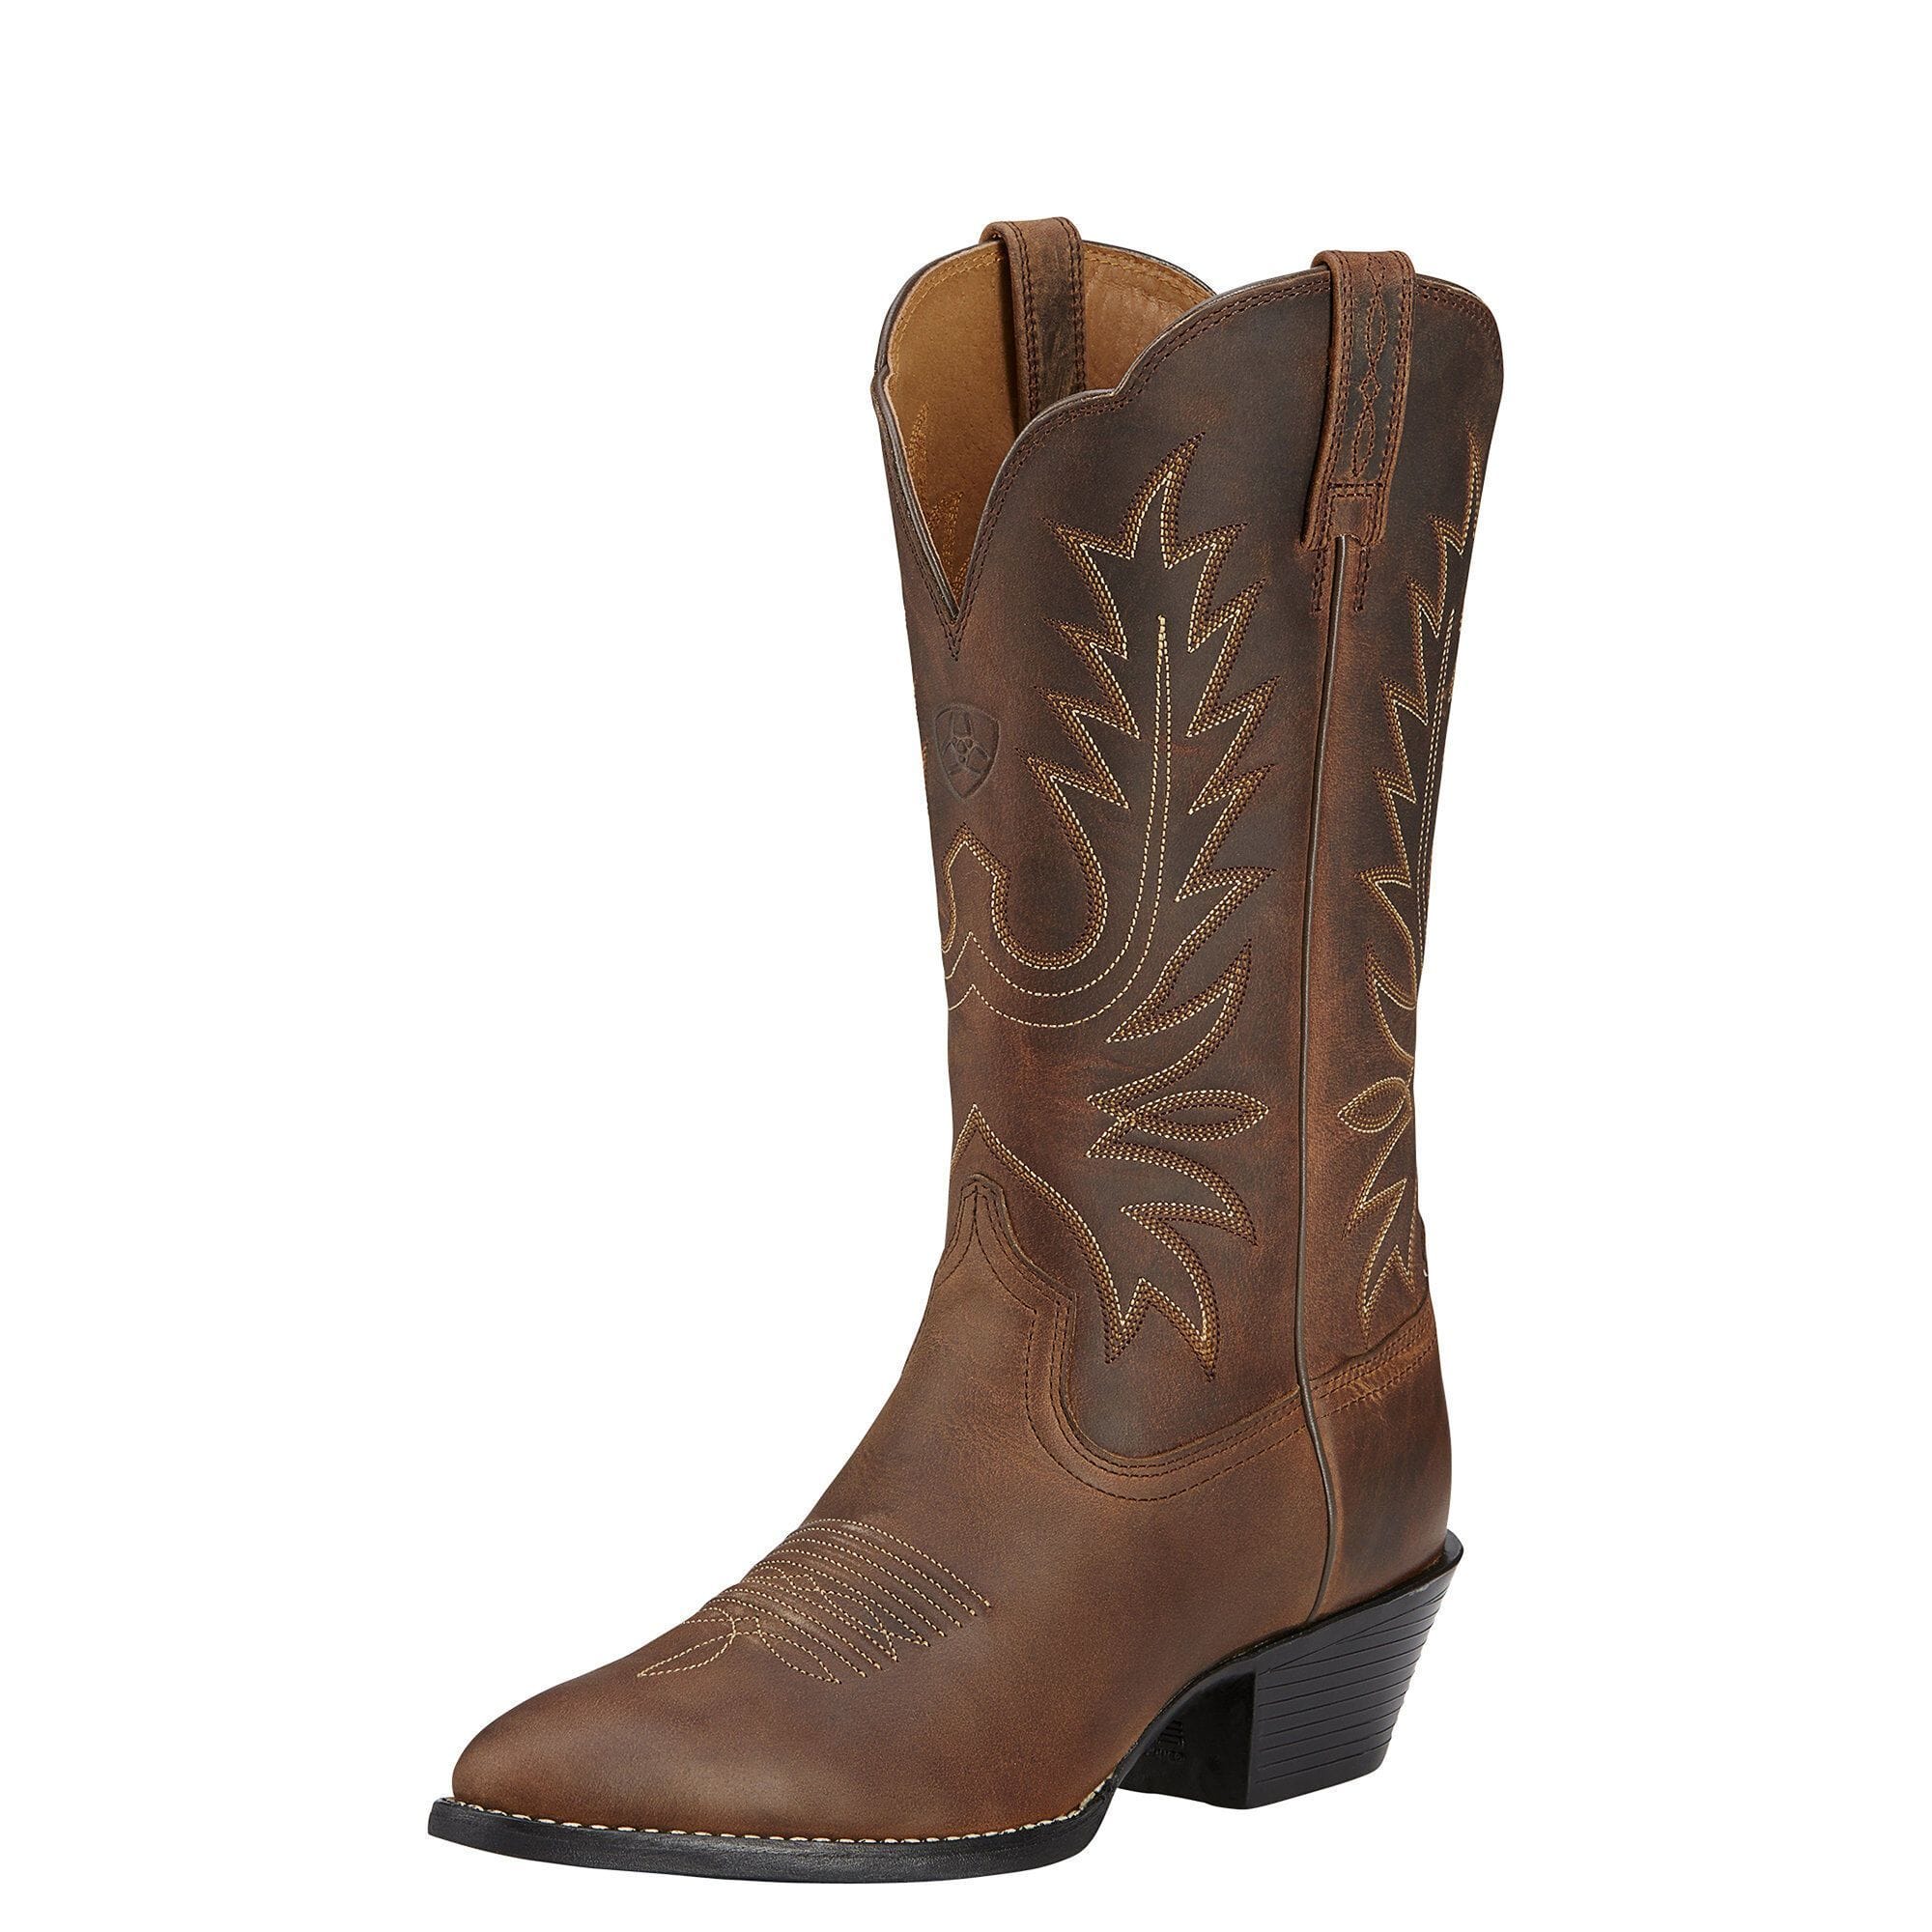 Ariat Women's Heritage Distressed Brown Western Cowgirl Boots